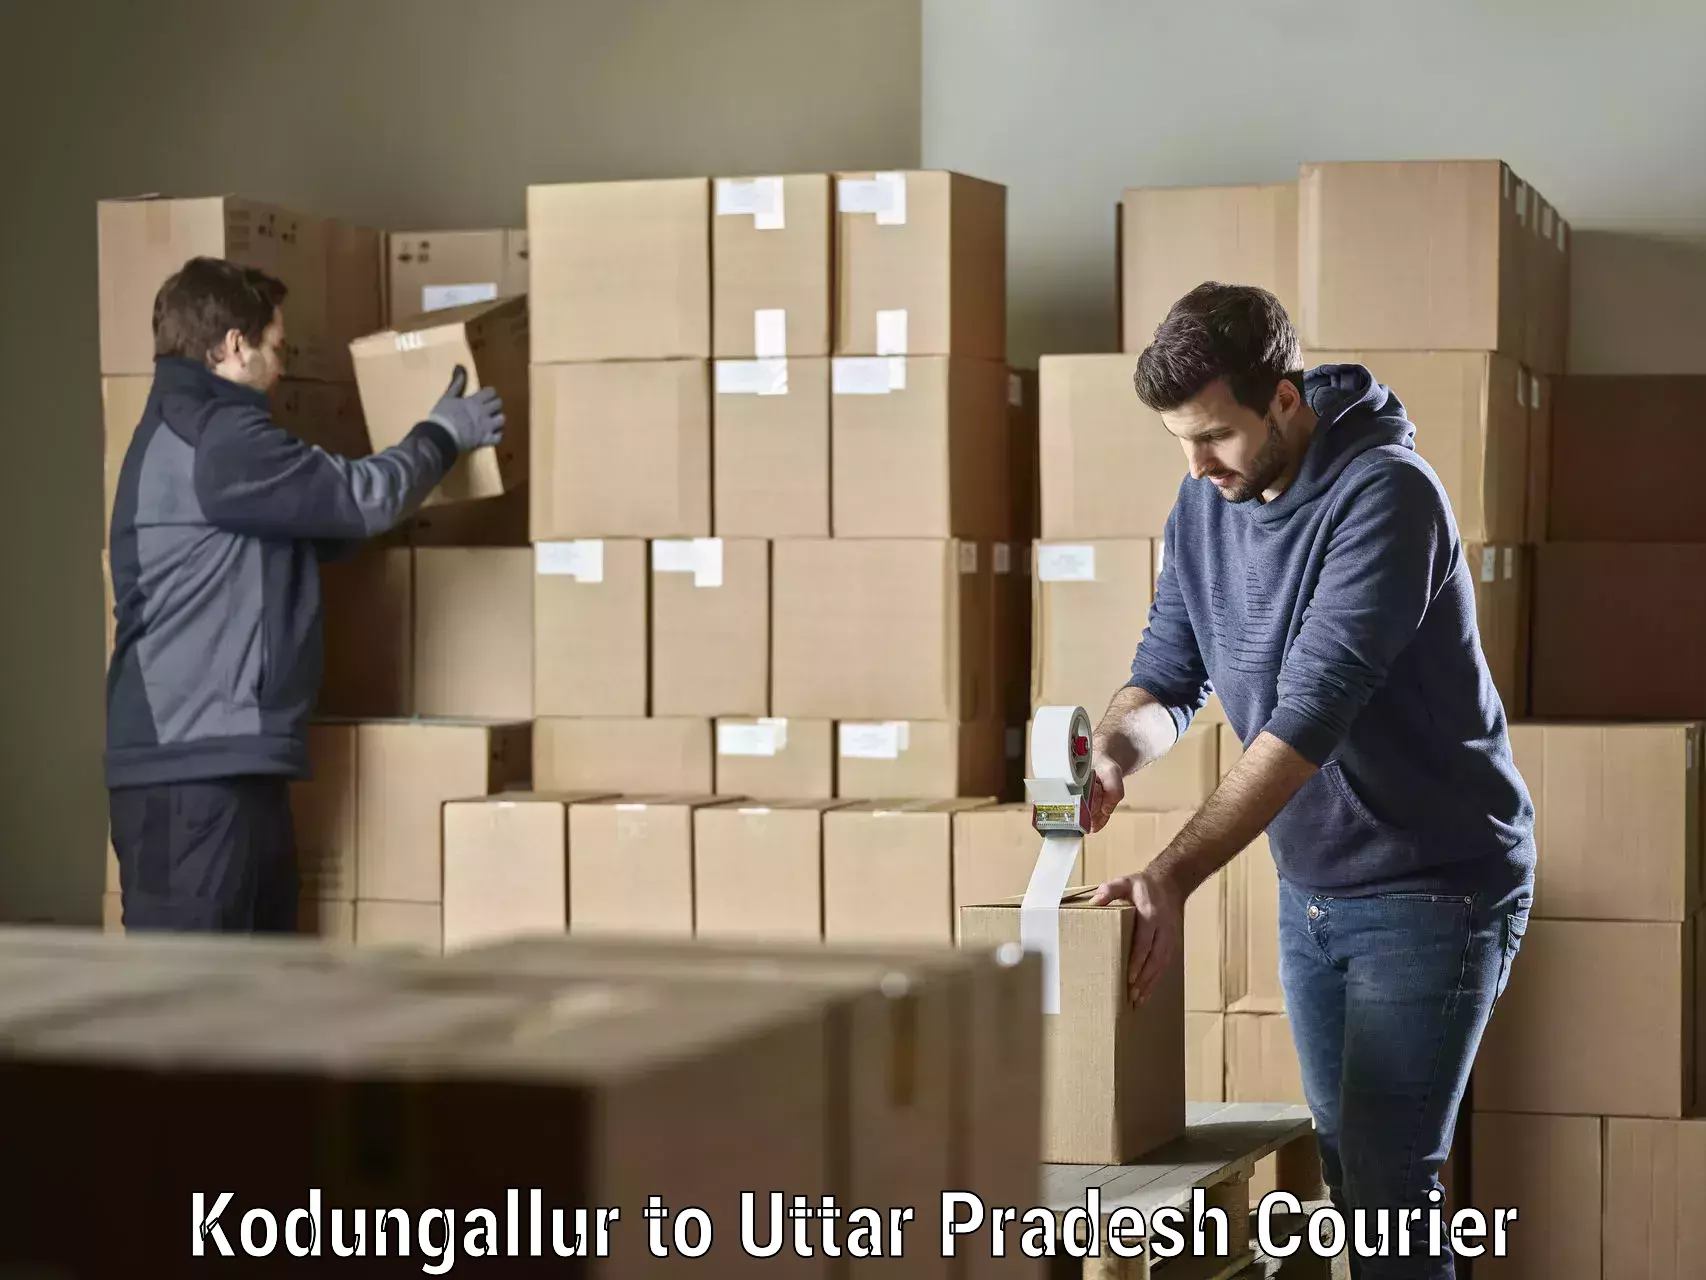 Tech-enabled shipping Kodungallur to Allahabad